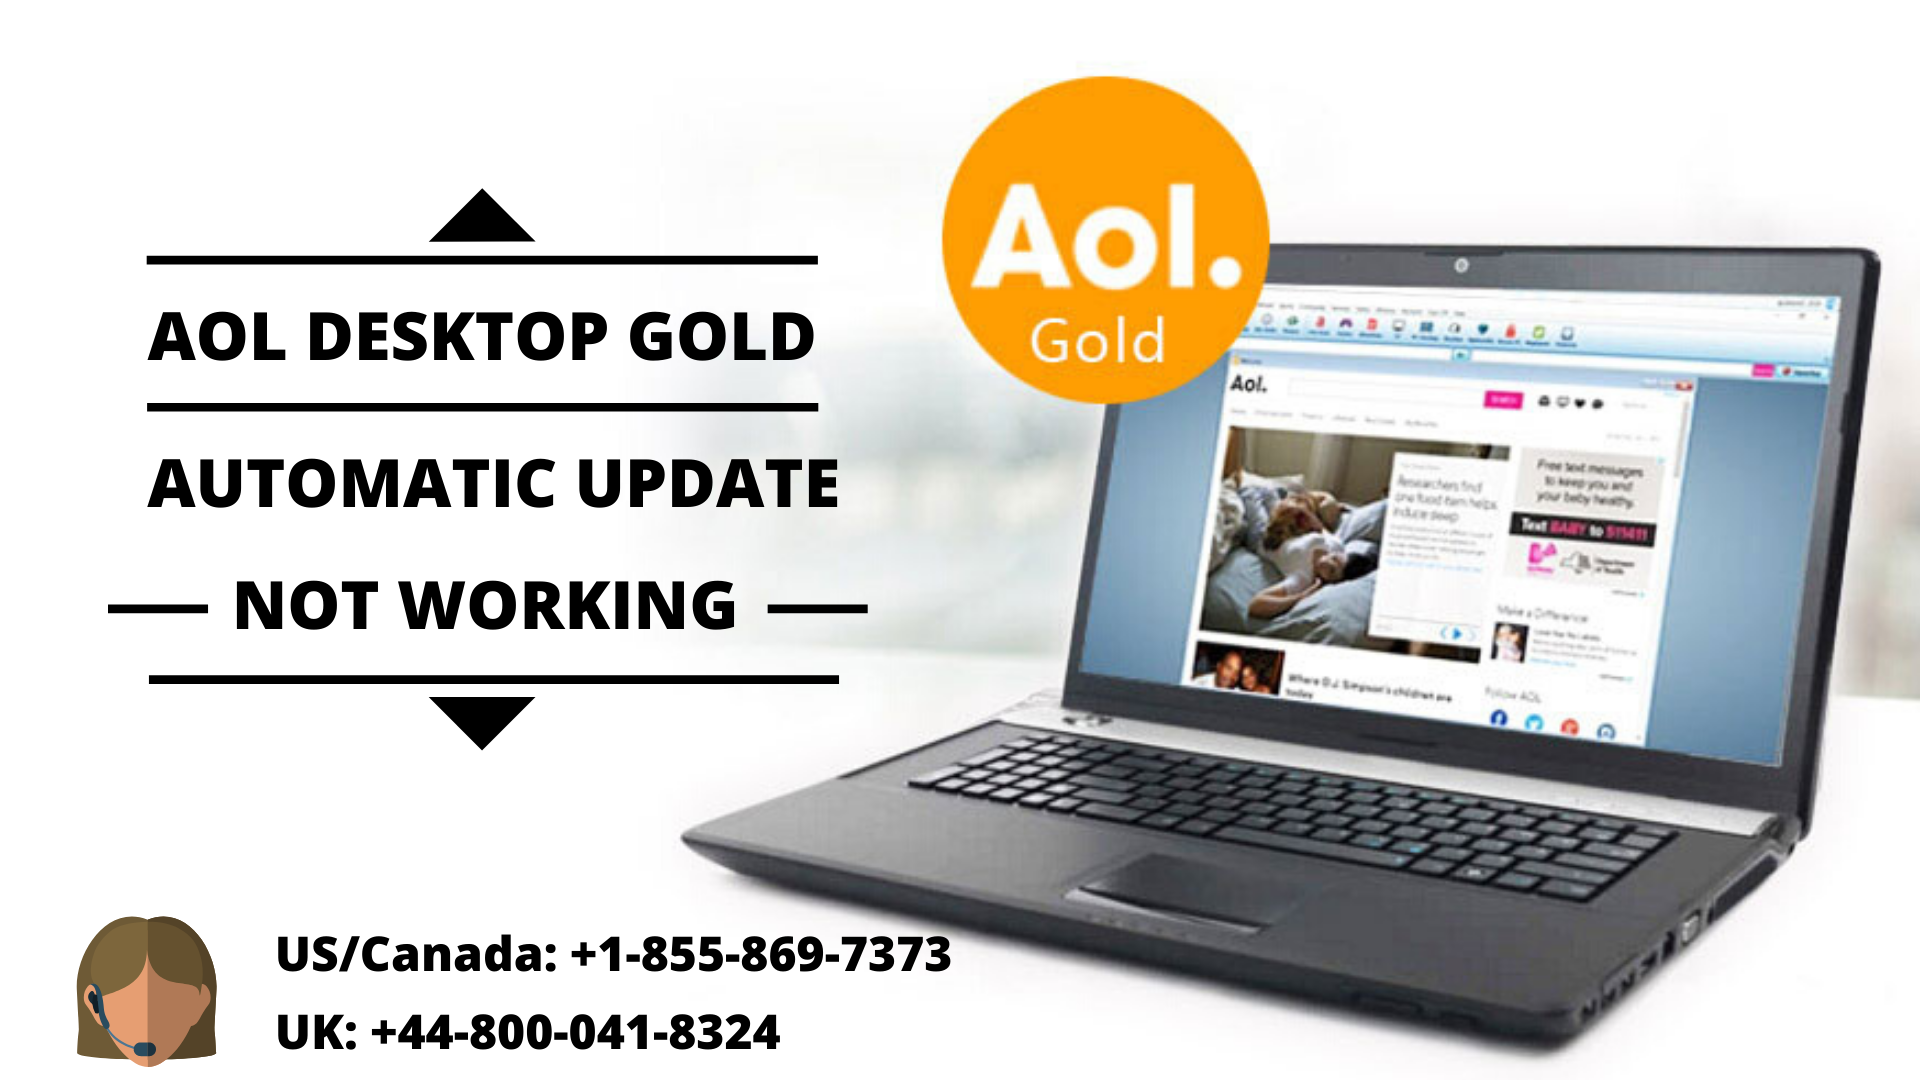 How To Fix The AOL Desktop Gold Automatic Update Error